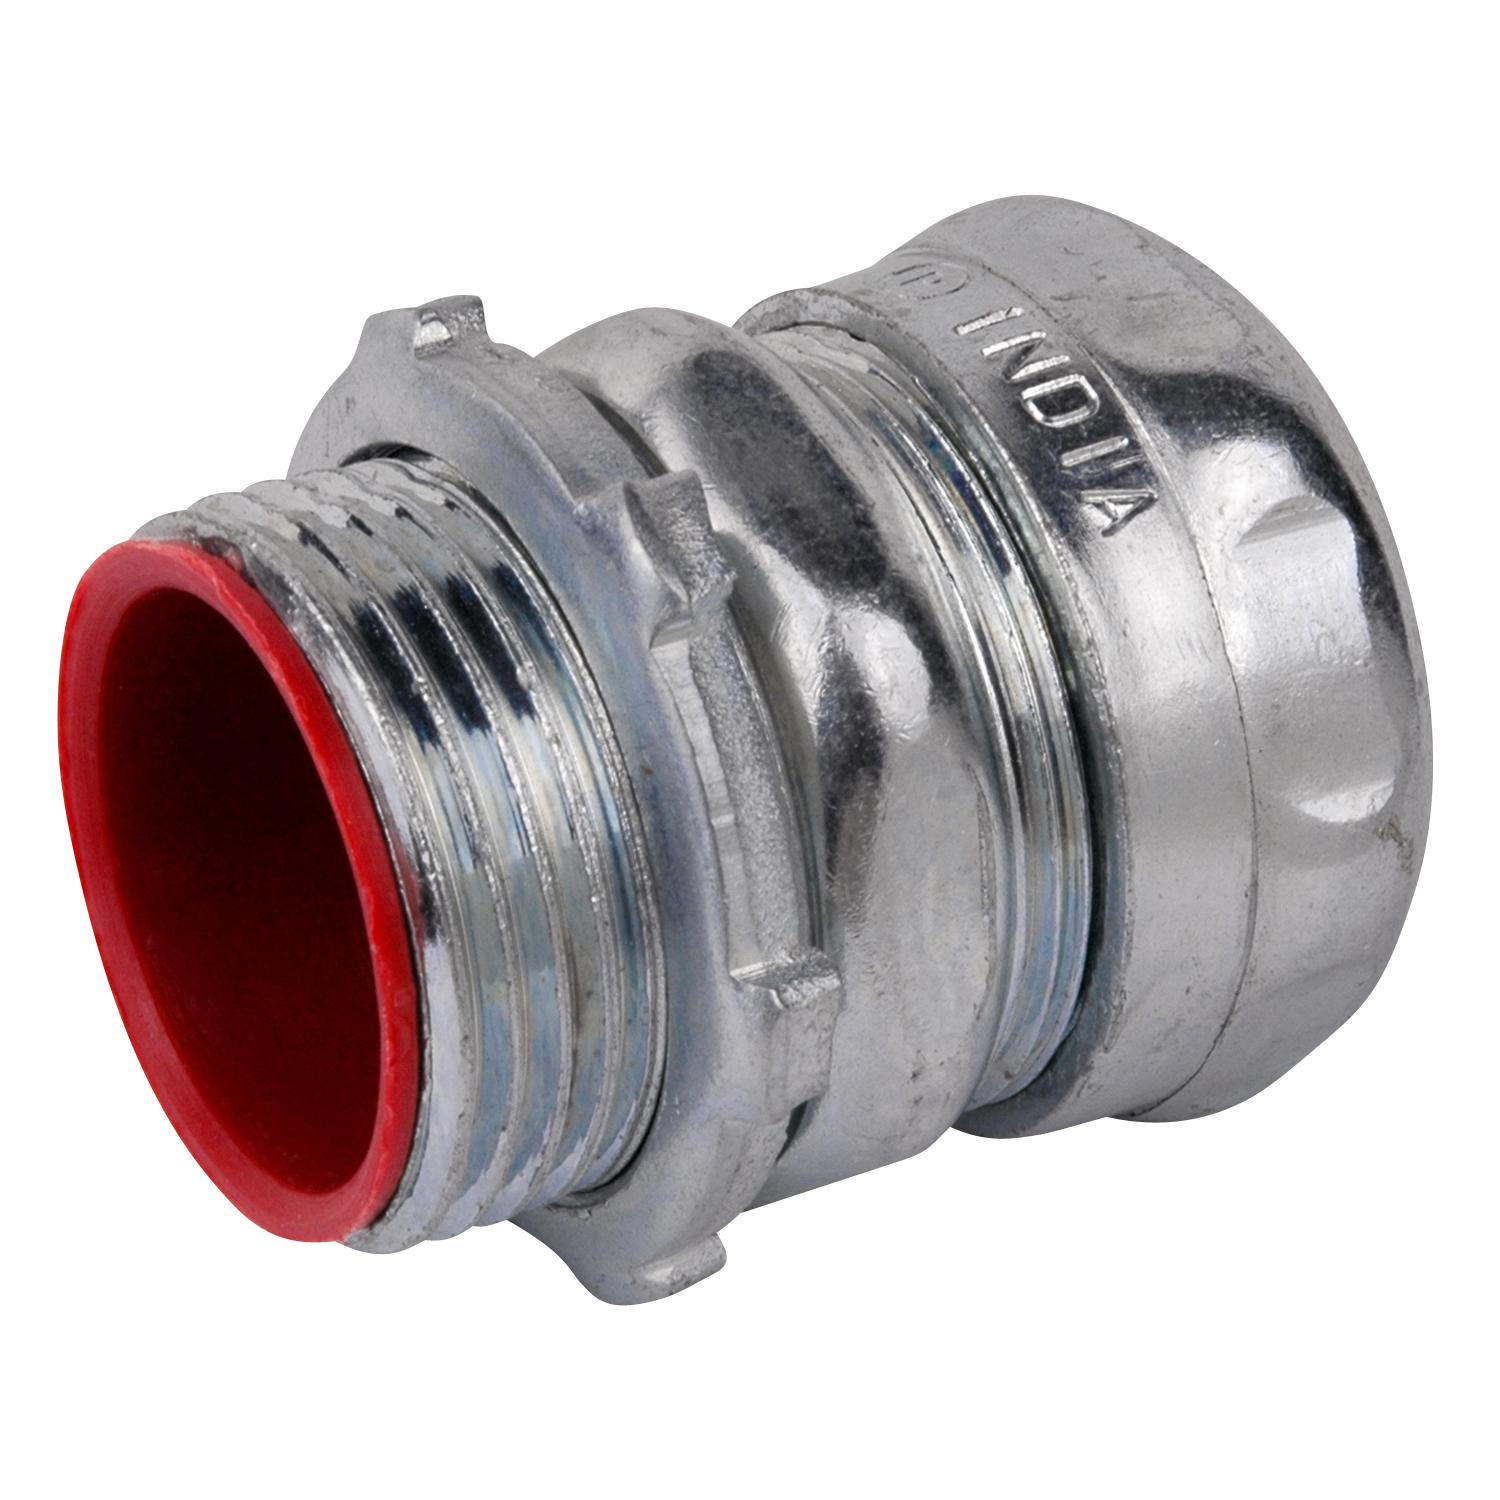 Thomas & Betts TC713A Steel City Compression Connector